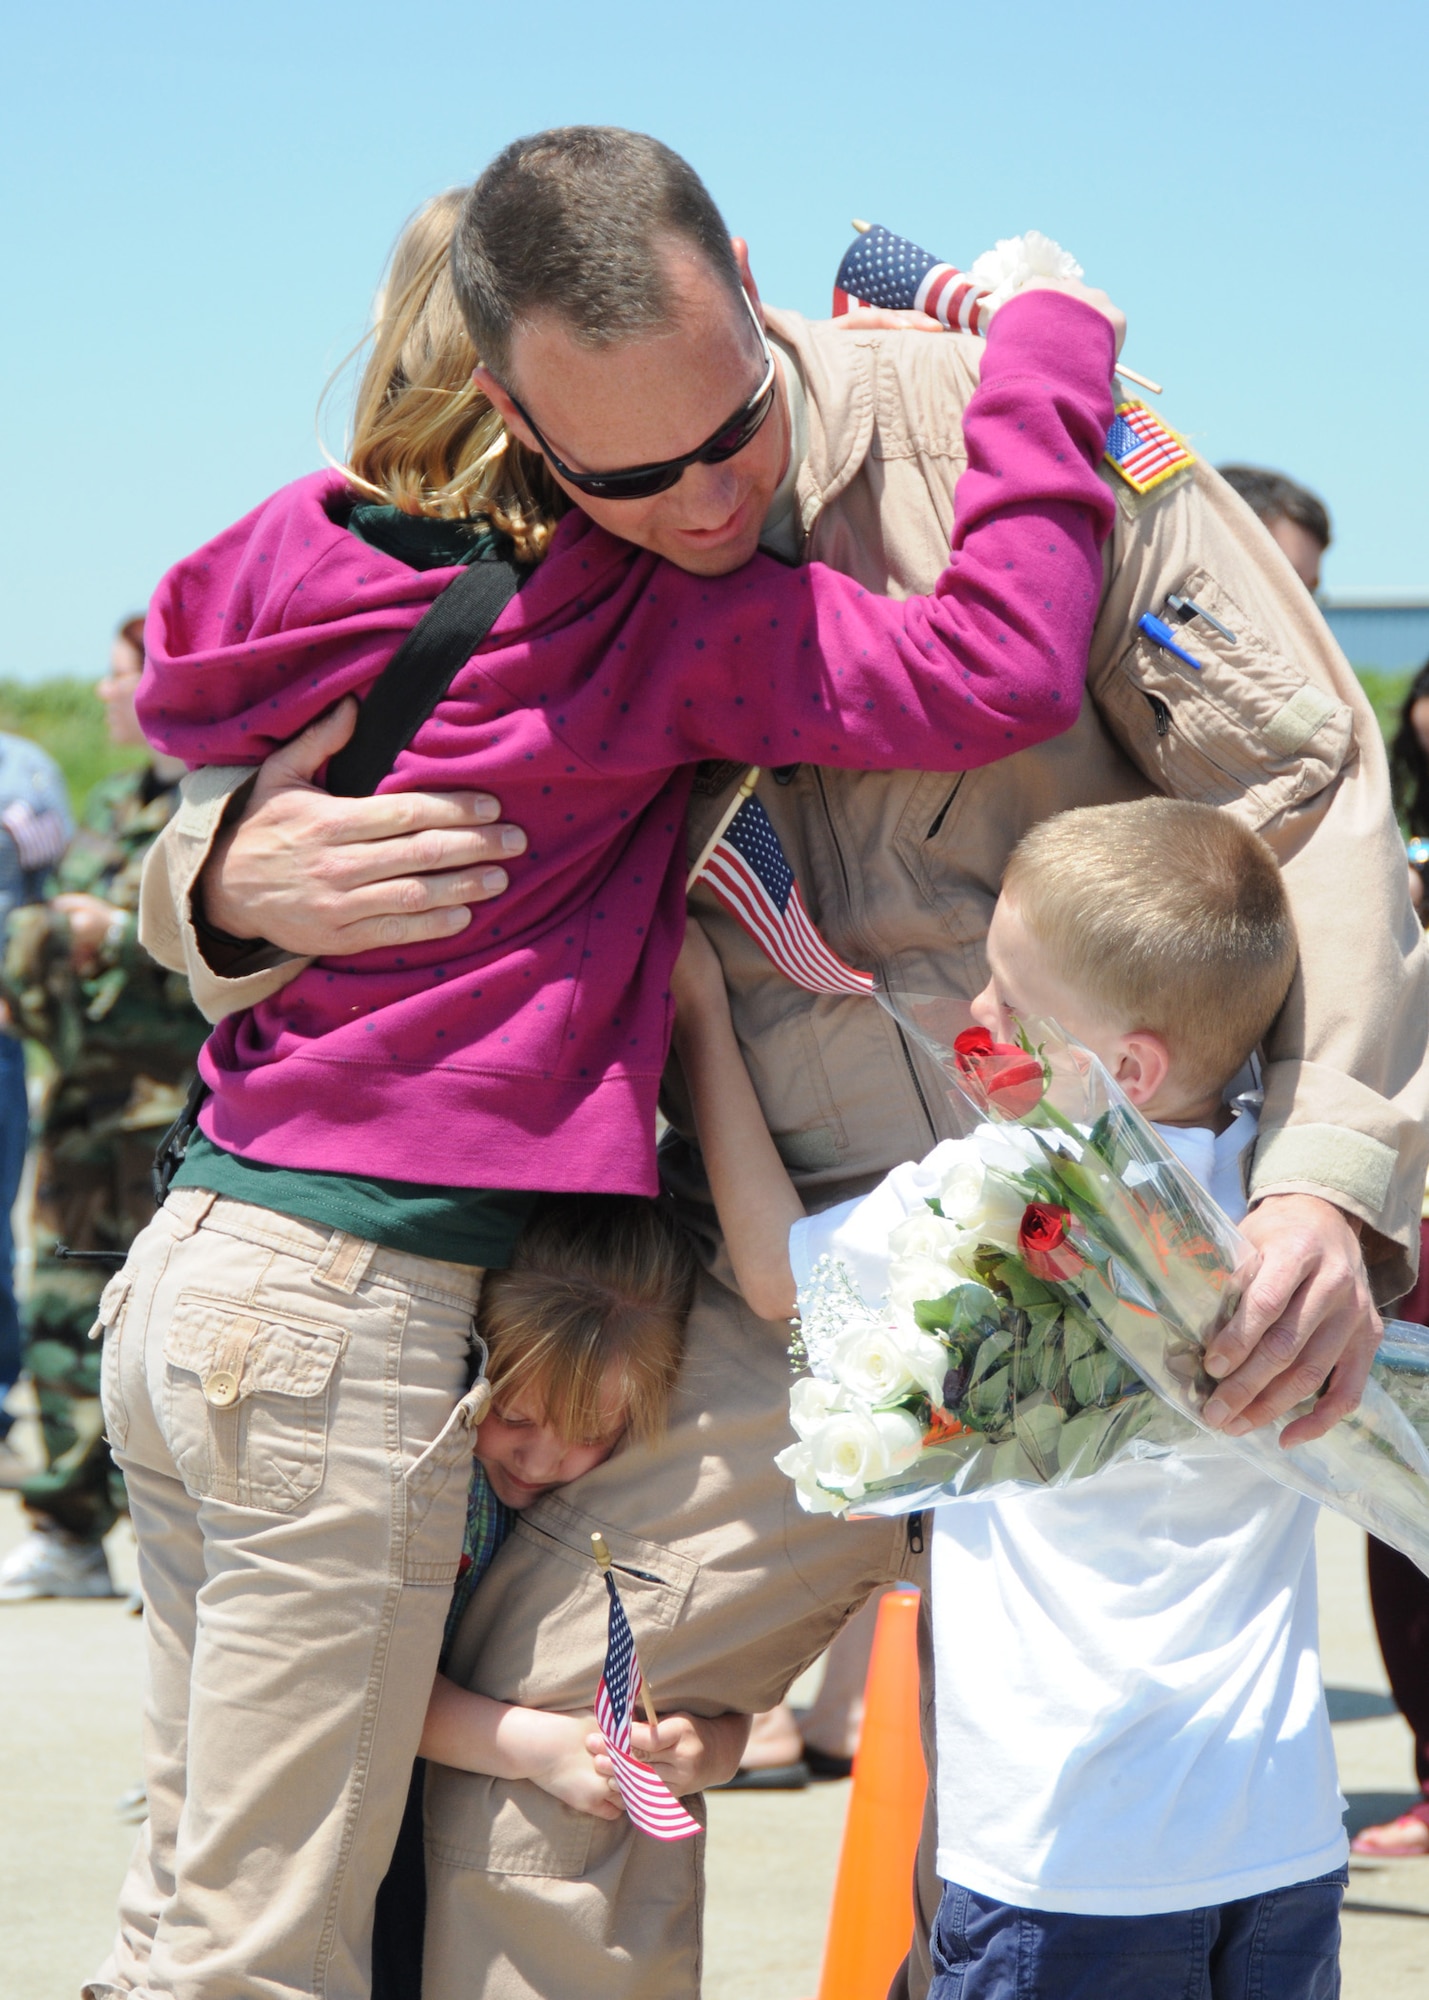 Lt. Col. Scott Wilson hugs his family after returning to Louisville, Ky., from Afganhistan on May 12. (USAF photo by Tech. Sgt. Phil Speck.)